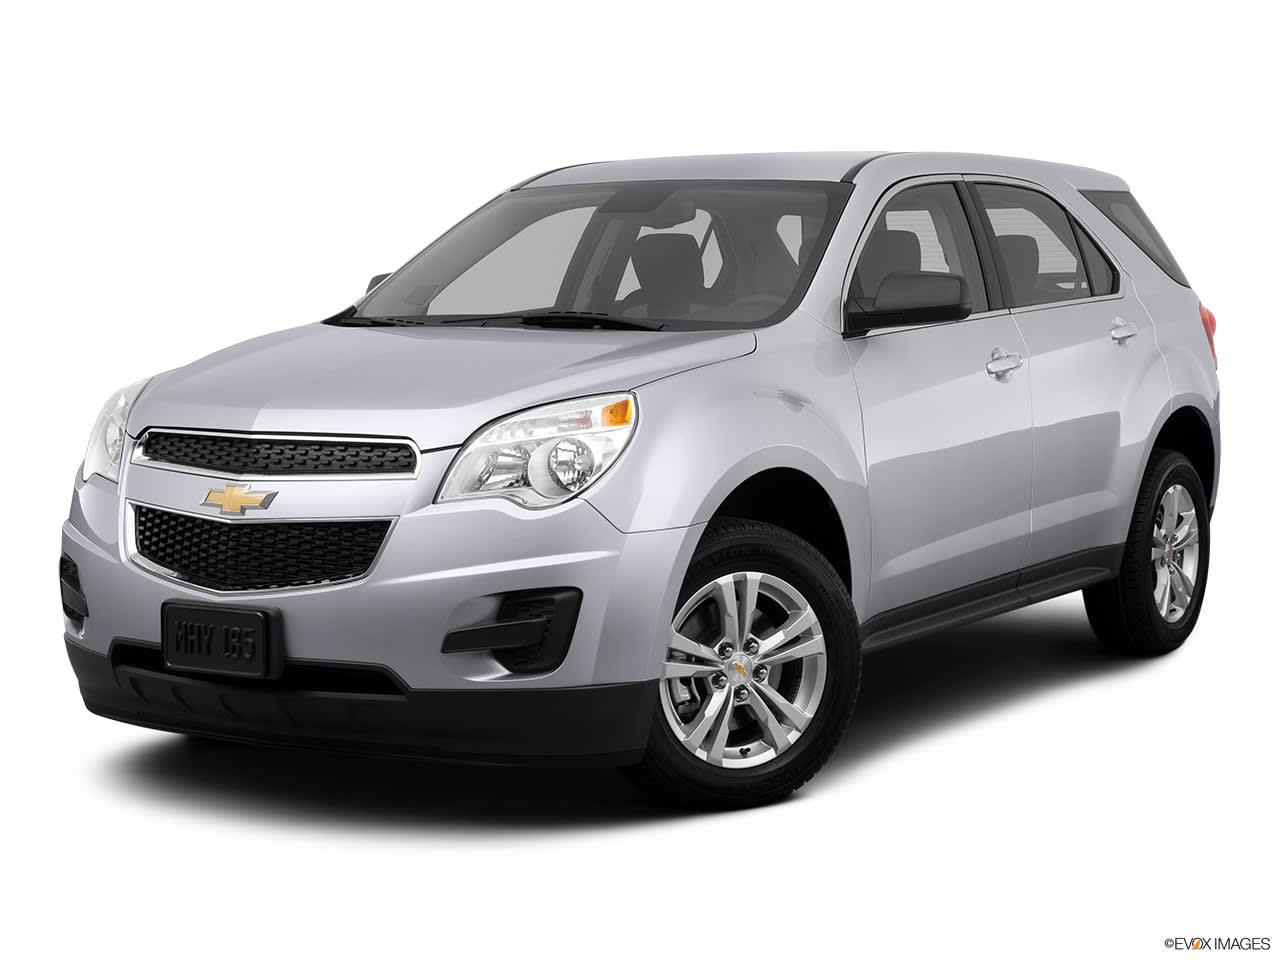 A Buyer's Guide to the 2012 Chevrolet Equinox | YourMechanic Advice